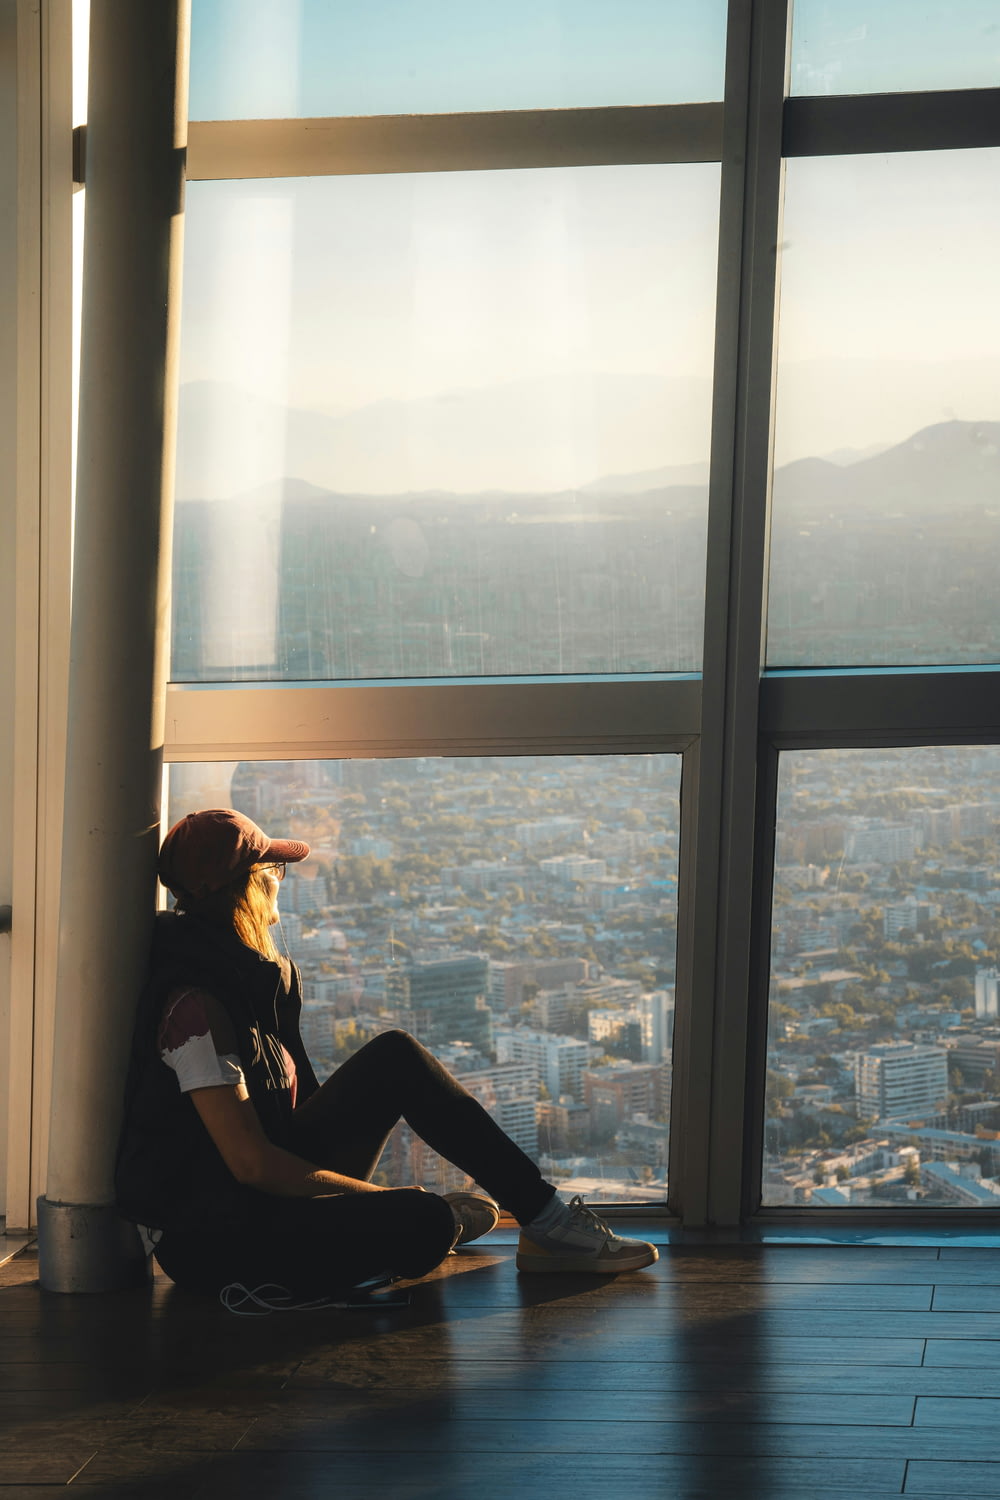 a person sitting on a ledge looking out a window